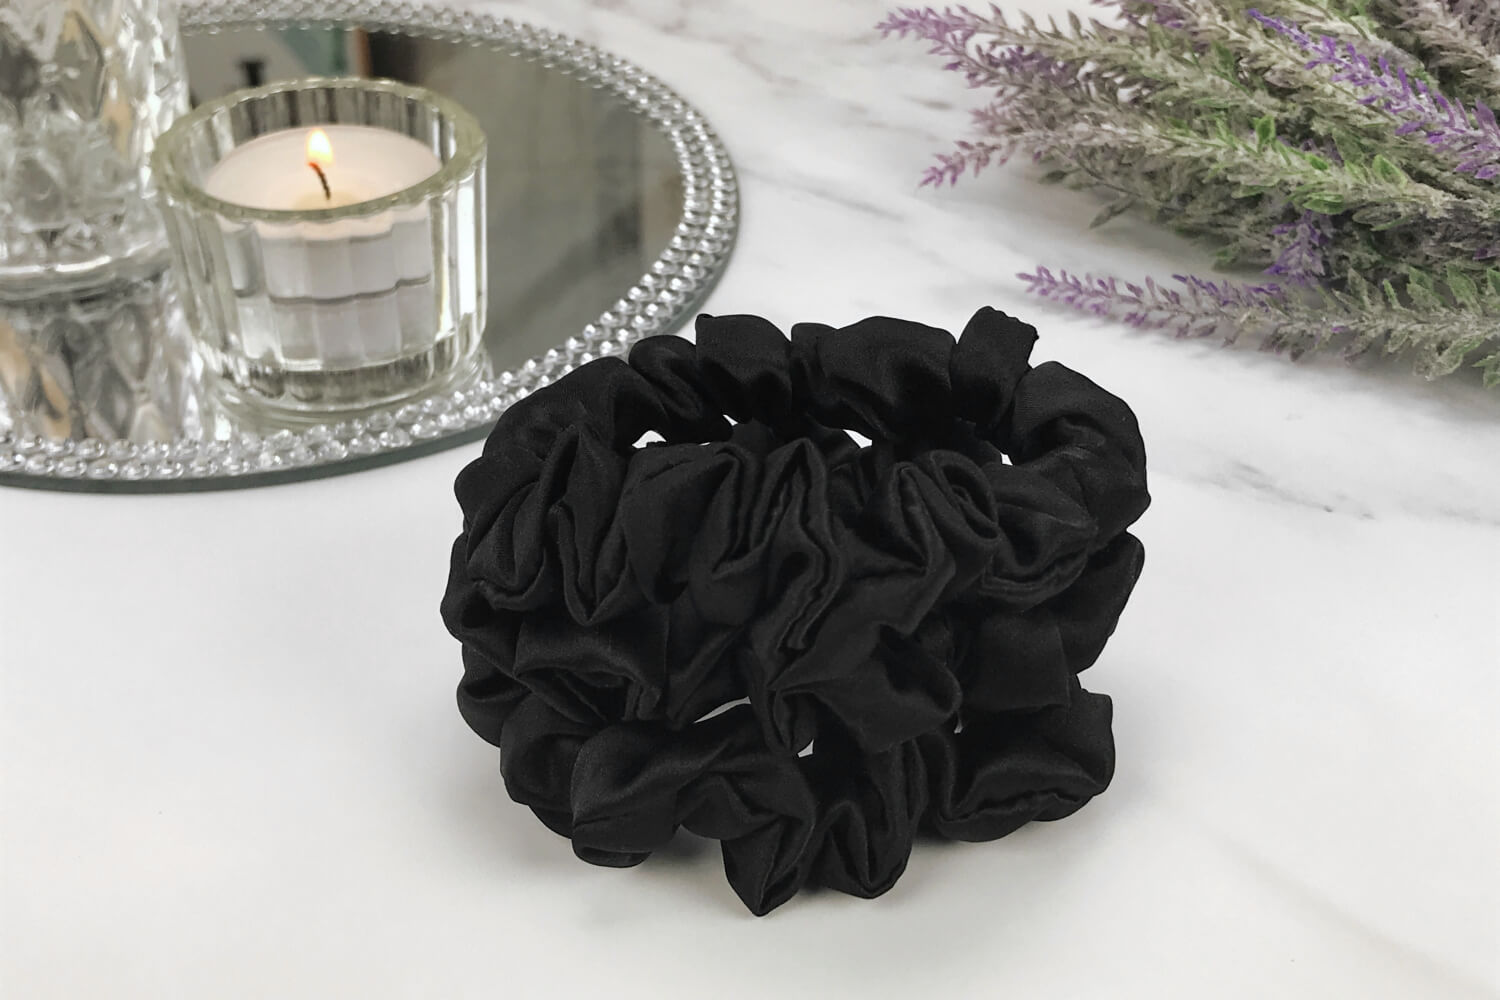 Celestial Silk skinny black silk scrunchies stacked on marble counter with lavender plant and a candle in the background